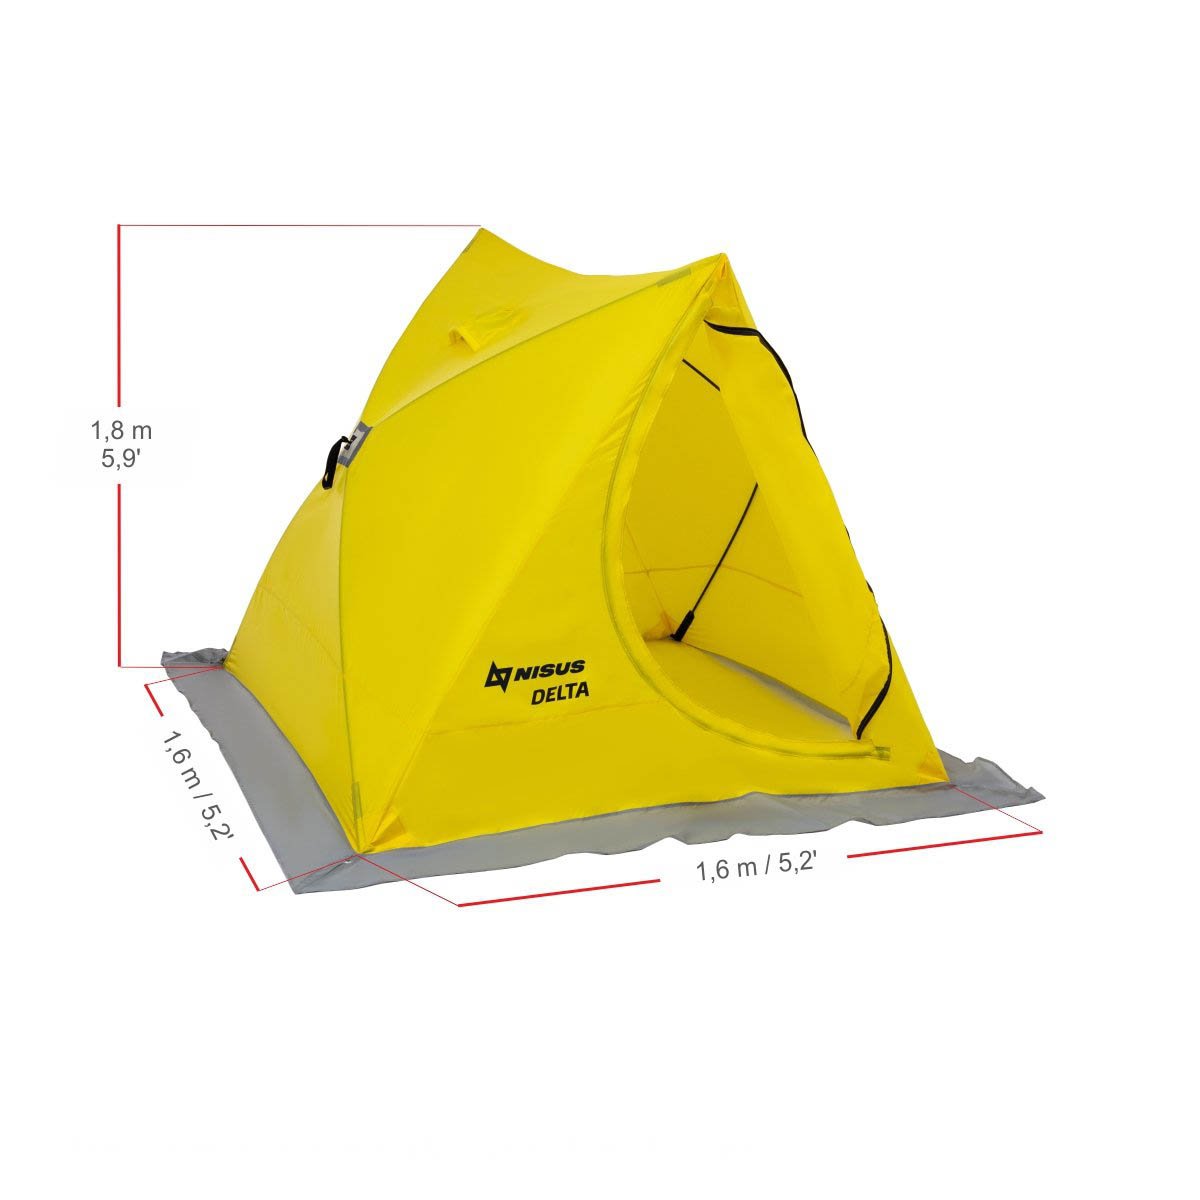 Delta Portable Ice Fishing Tent Shelter for 2 Persons is 5.9 feet high, 5.2 feet long and 5.2 feet wide